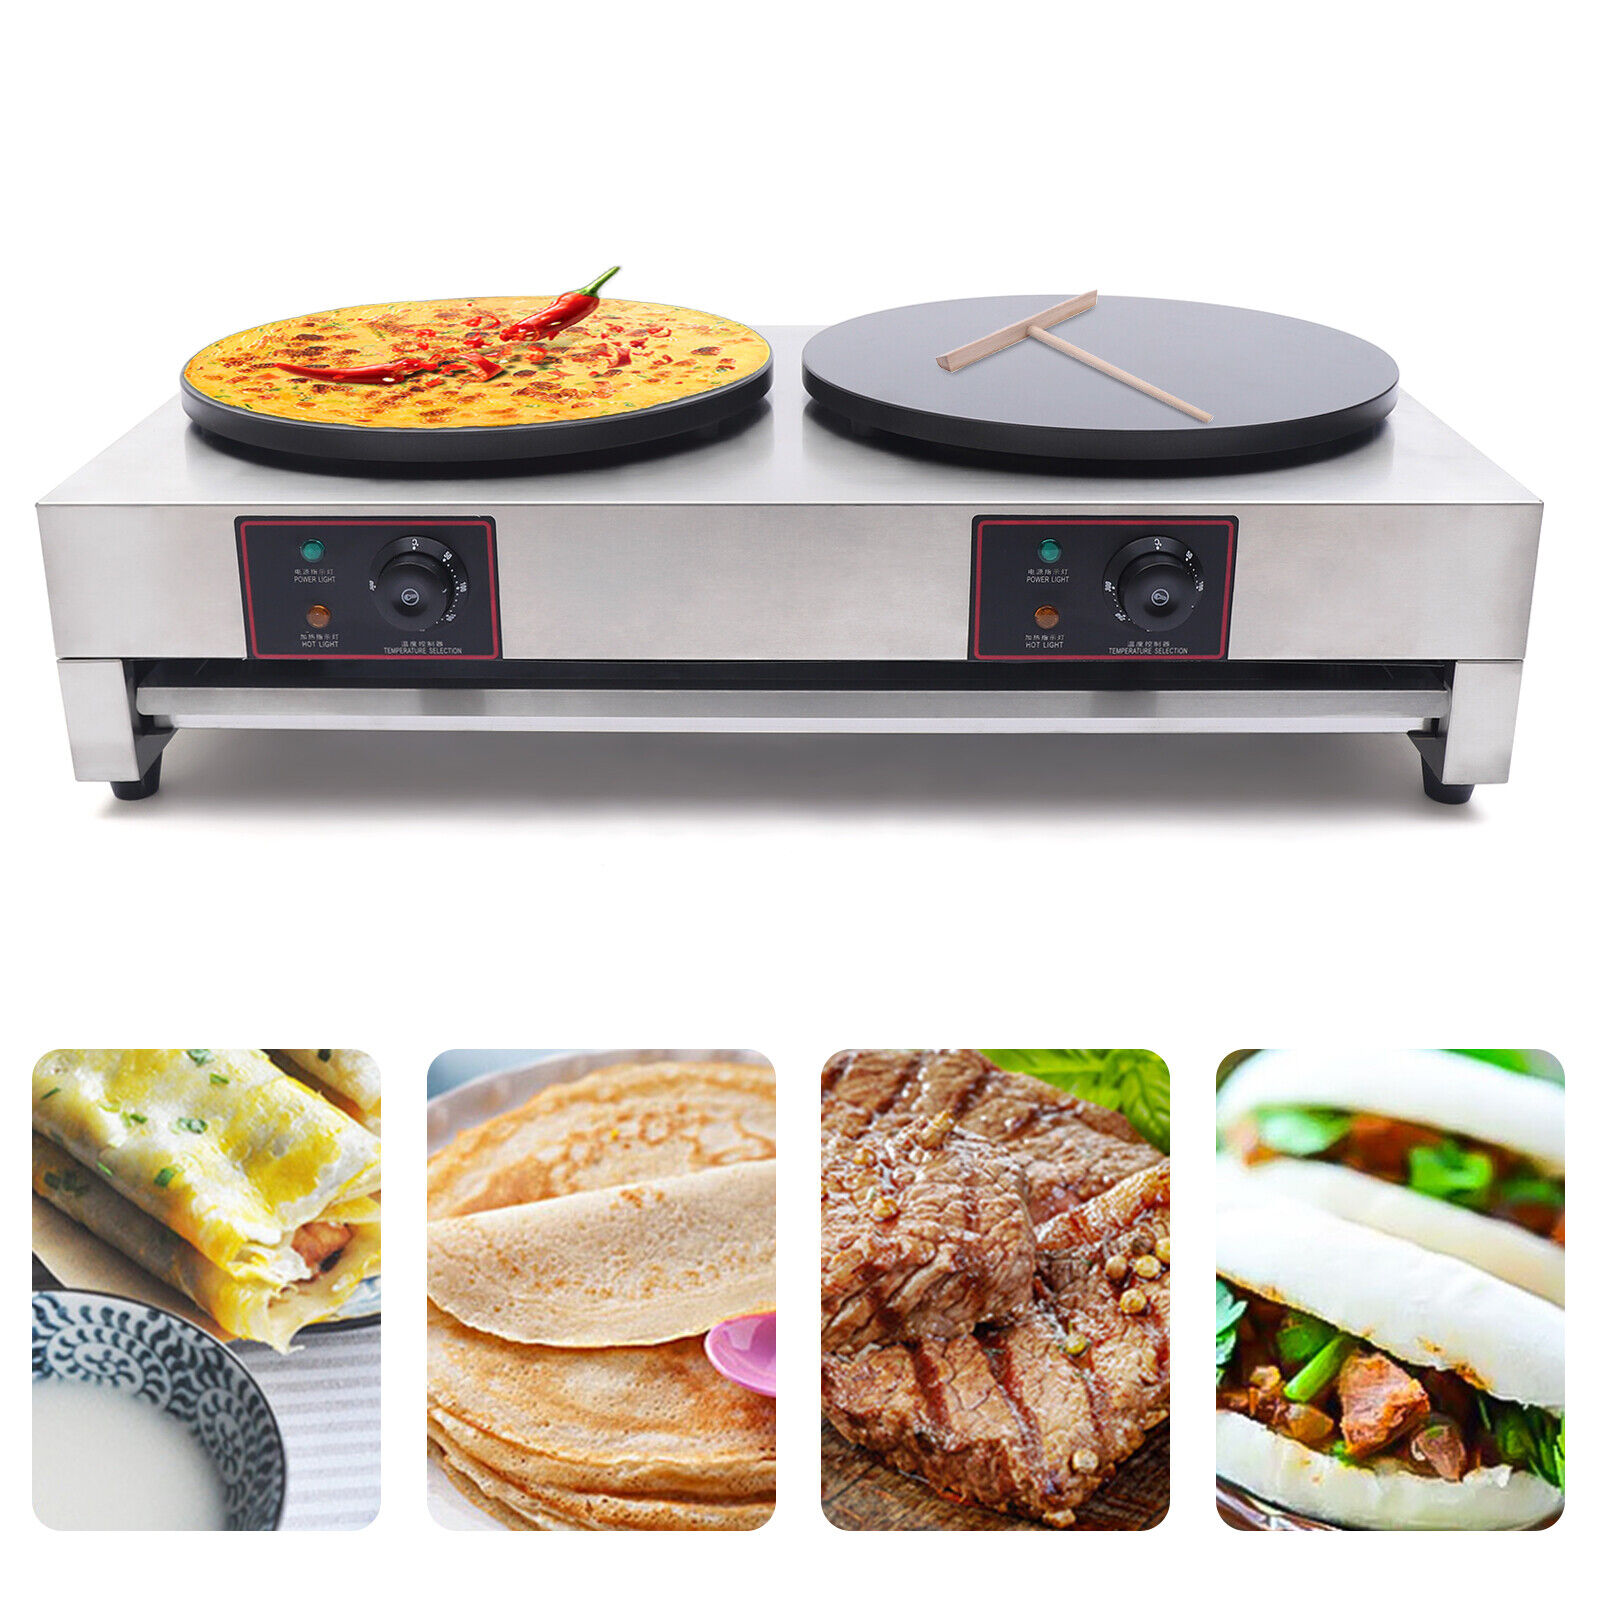 3kw+3kw 40cm 16" Commercial Double Pancake Maker Luxury Electric Crepe Unbranded Does Not Apply - фотография #5